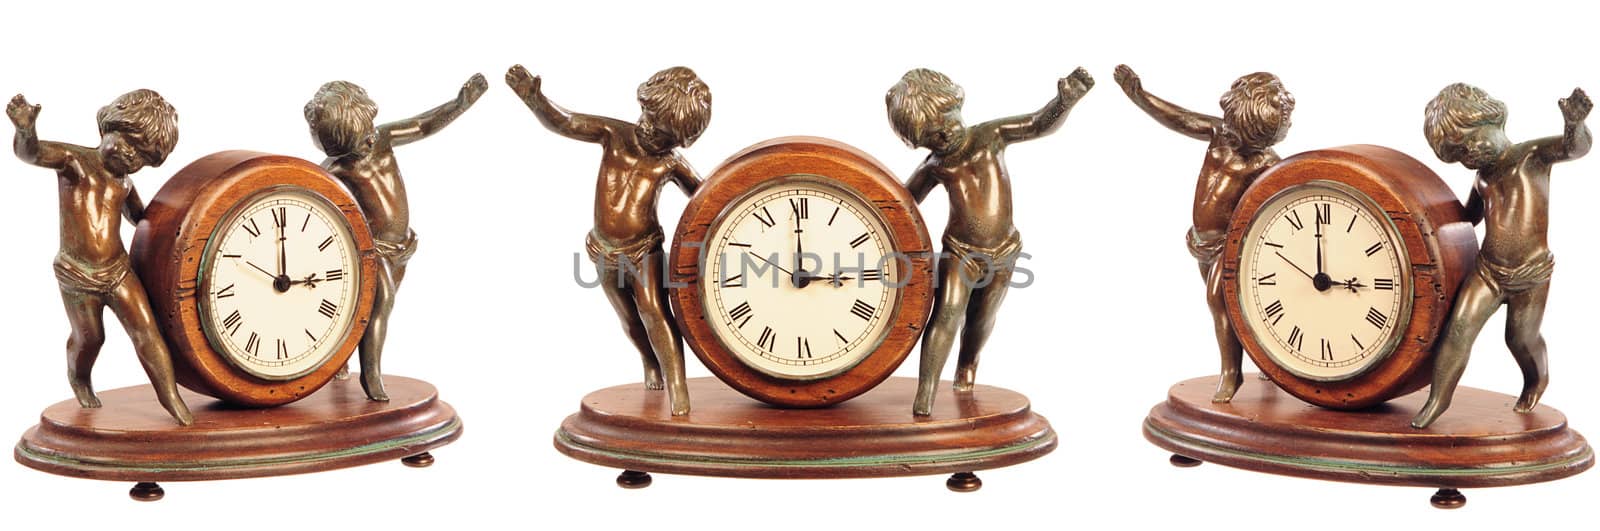 isolated old-fashioned clock on white